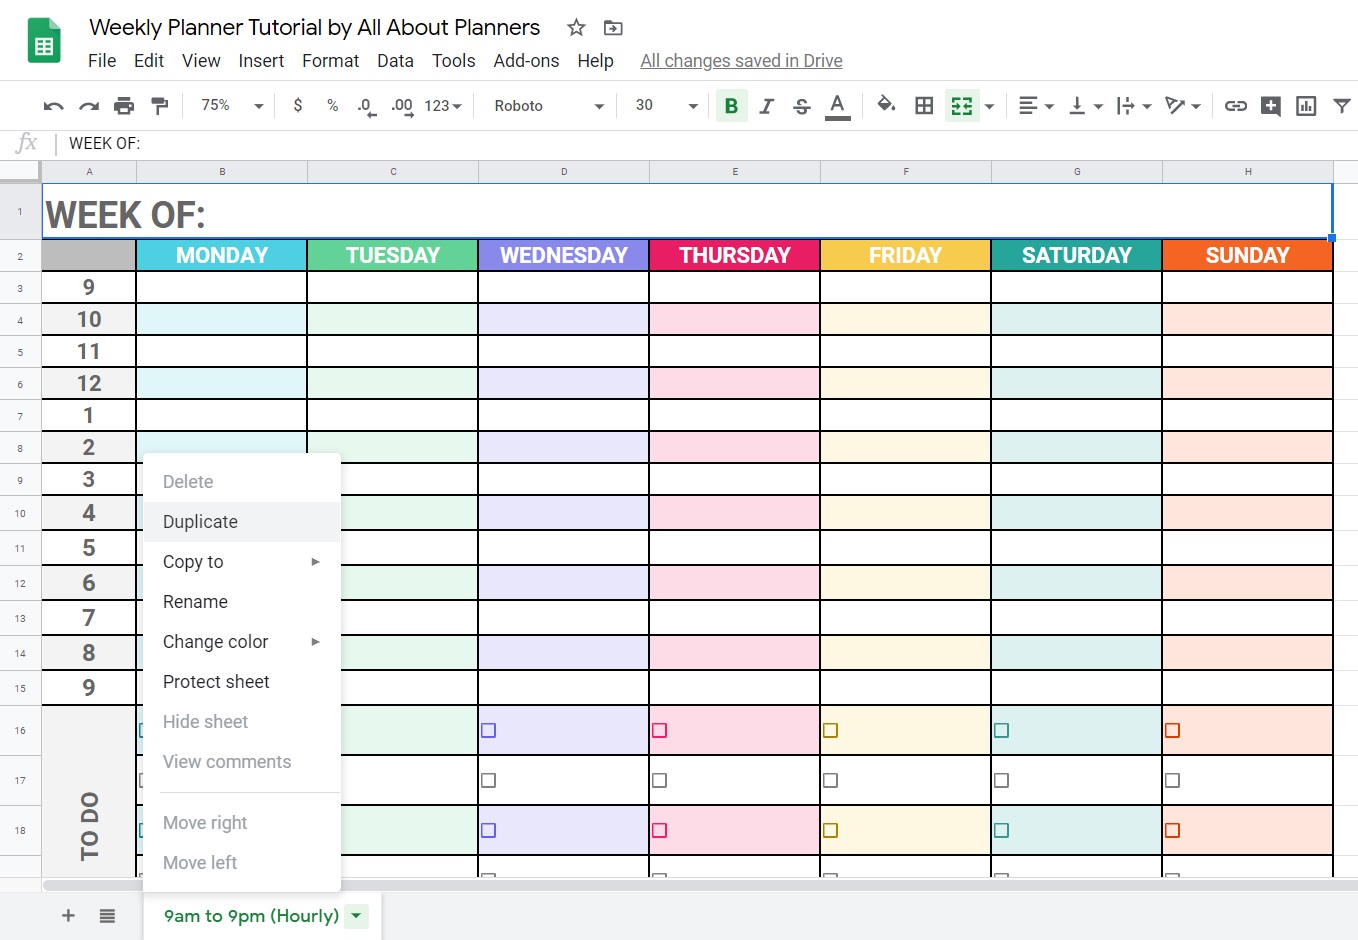 How To Make A Weekly Planner Using Google Sheets free Online Tool All About Planners